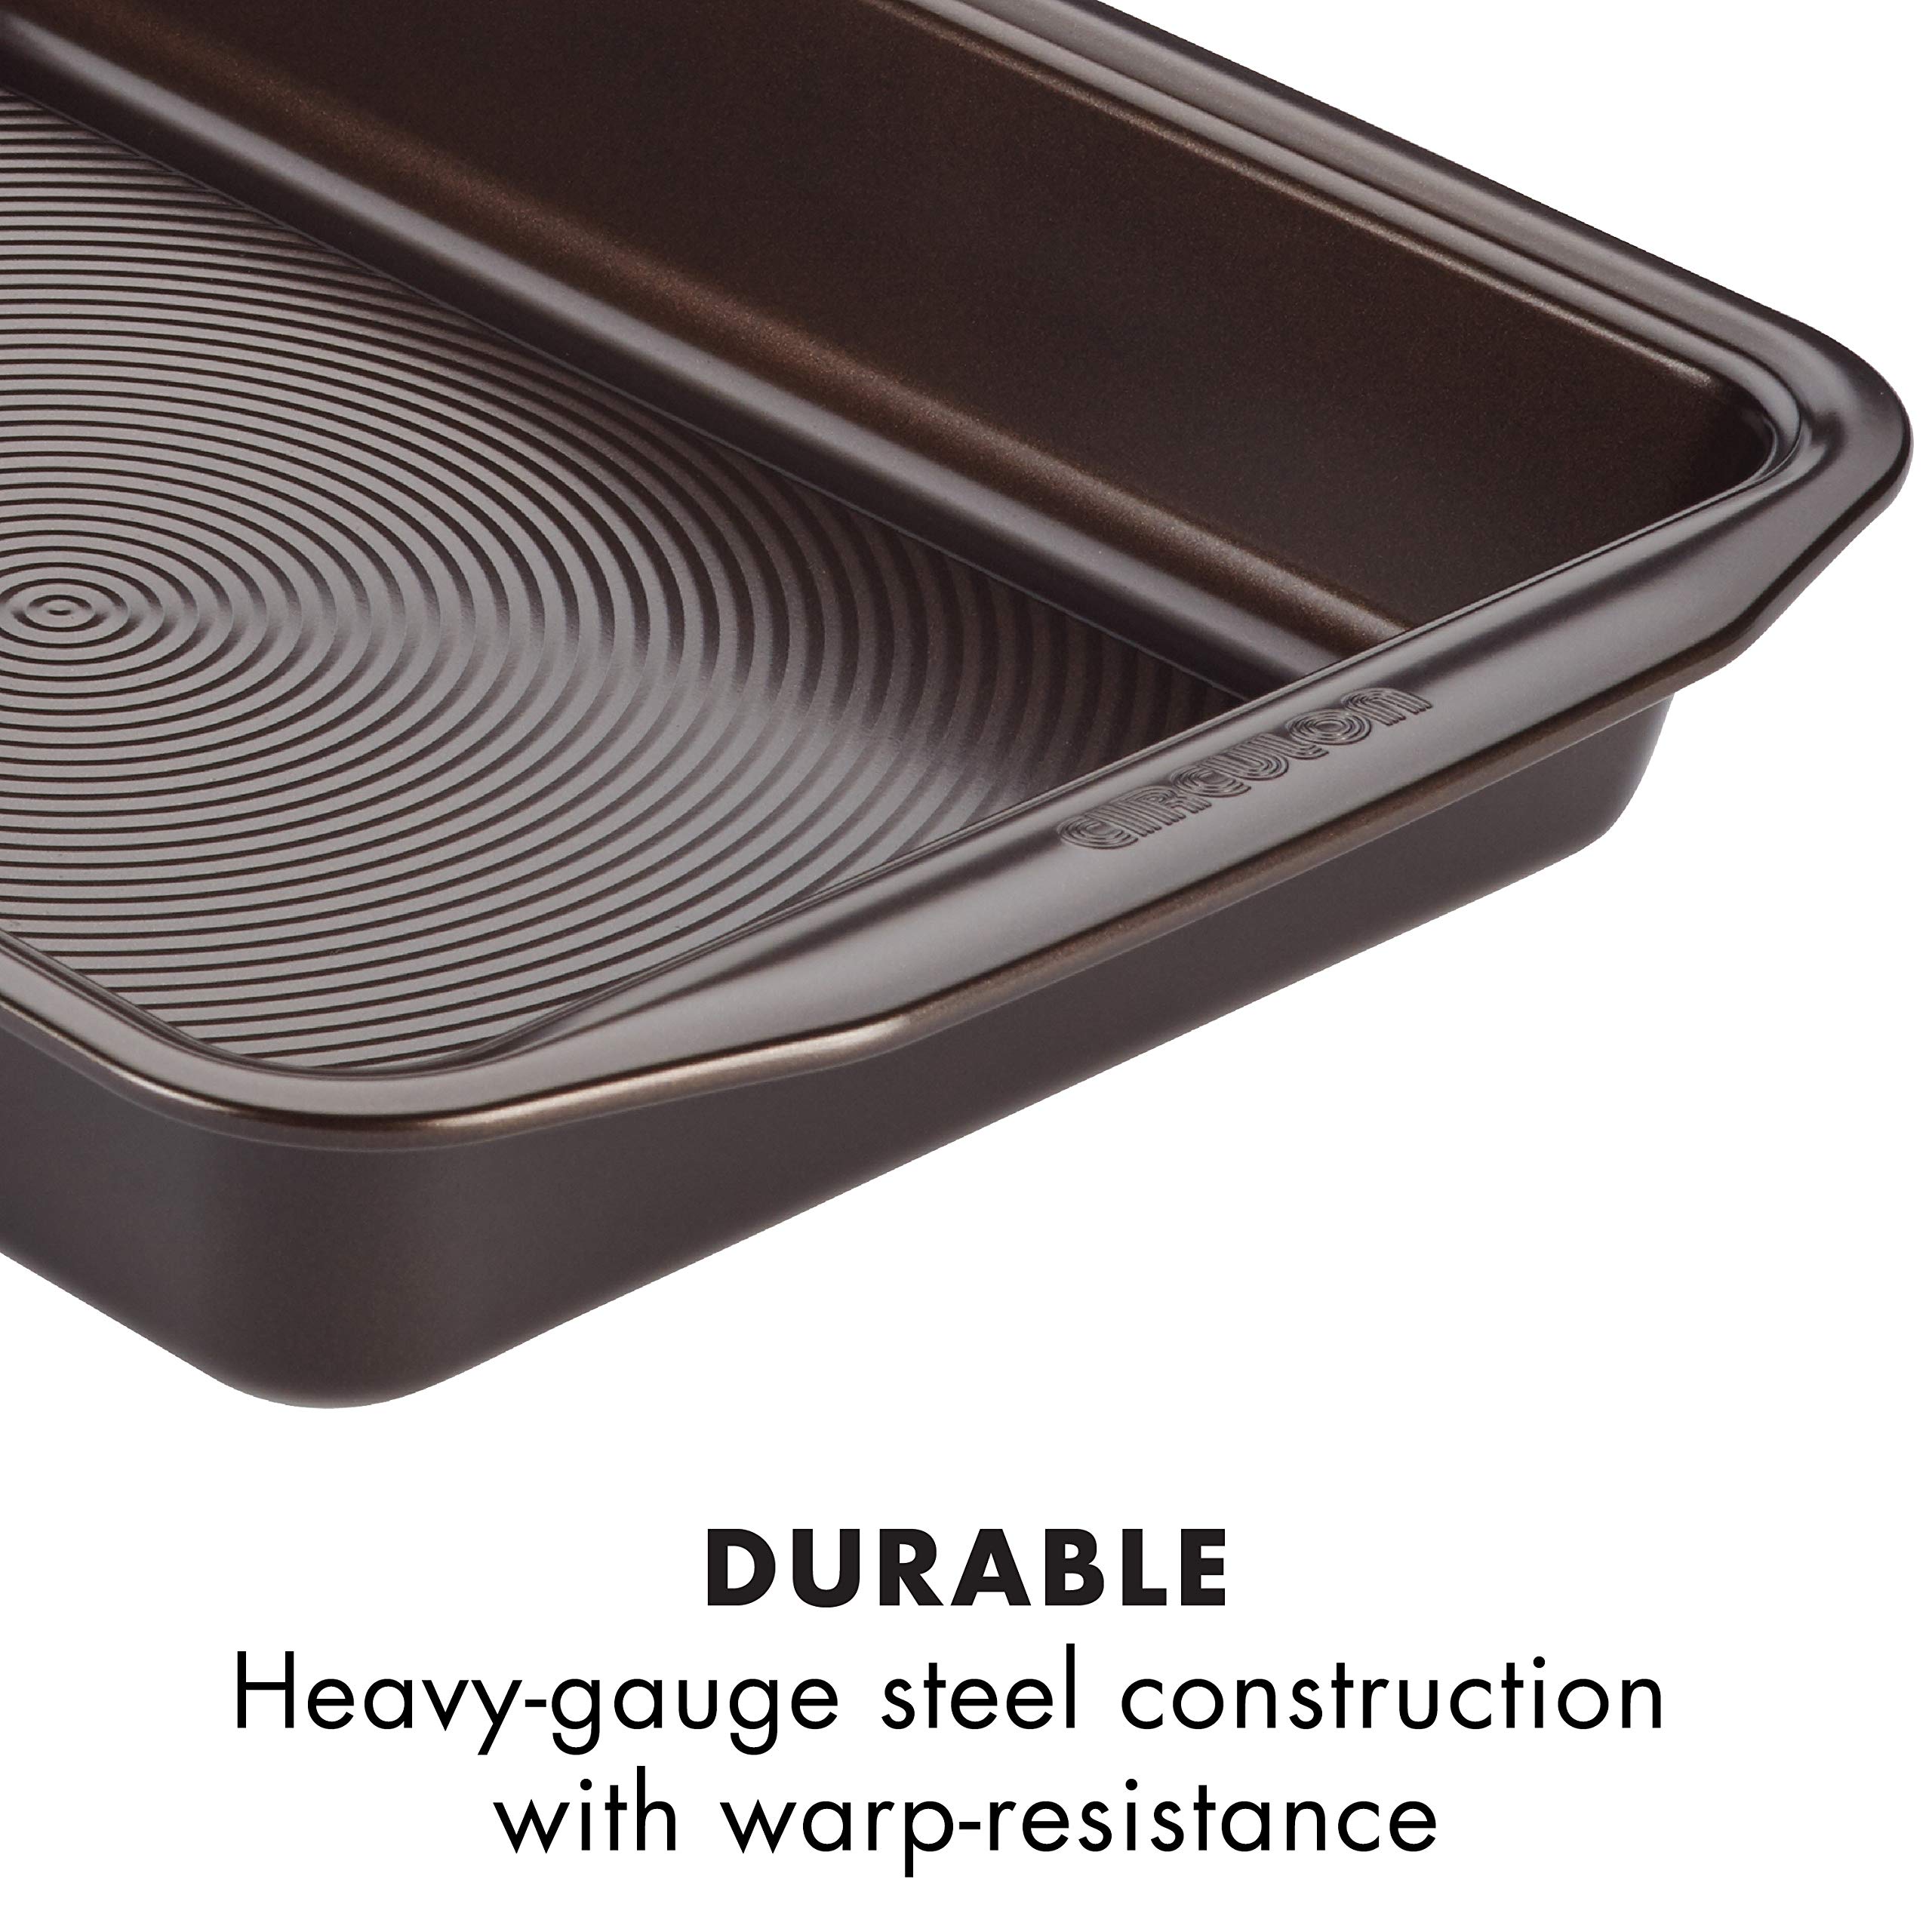 Circulon Nonstick Bakeware Set with Nonstick Cookie Sheets / Baking Sheets - 2 Piece, Chocolate Brown